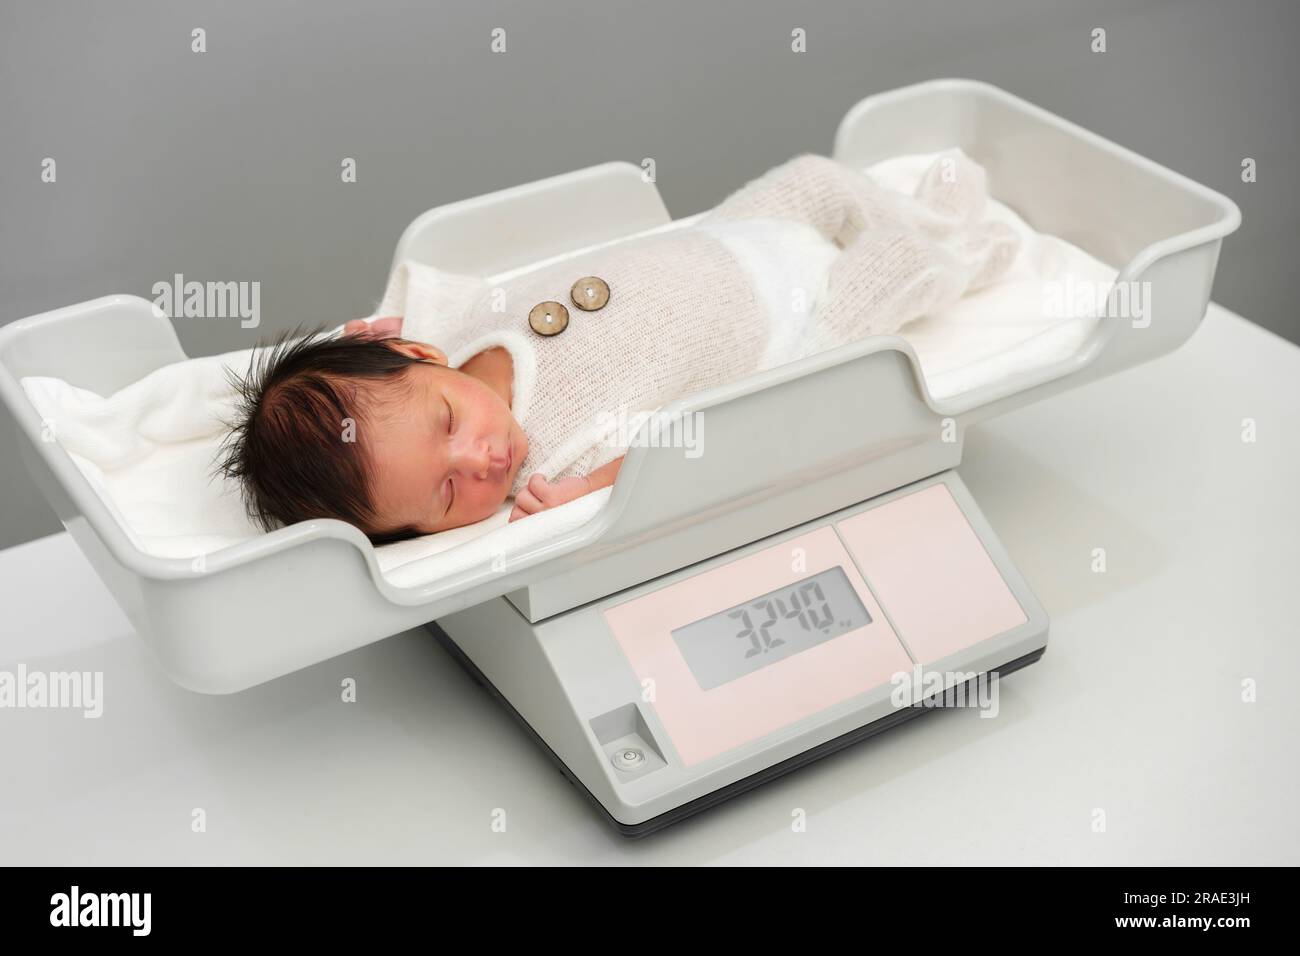 Newborn Baby On Weighing Scale Stock Photo, Picture and Royalty Free Image.  Image 24134897.